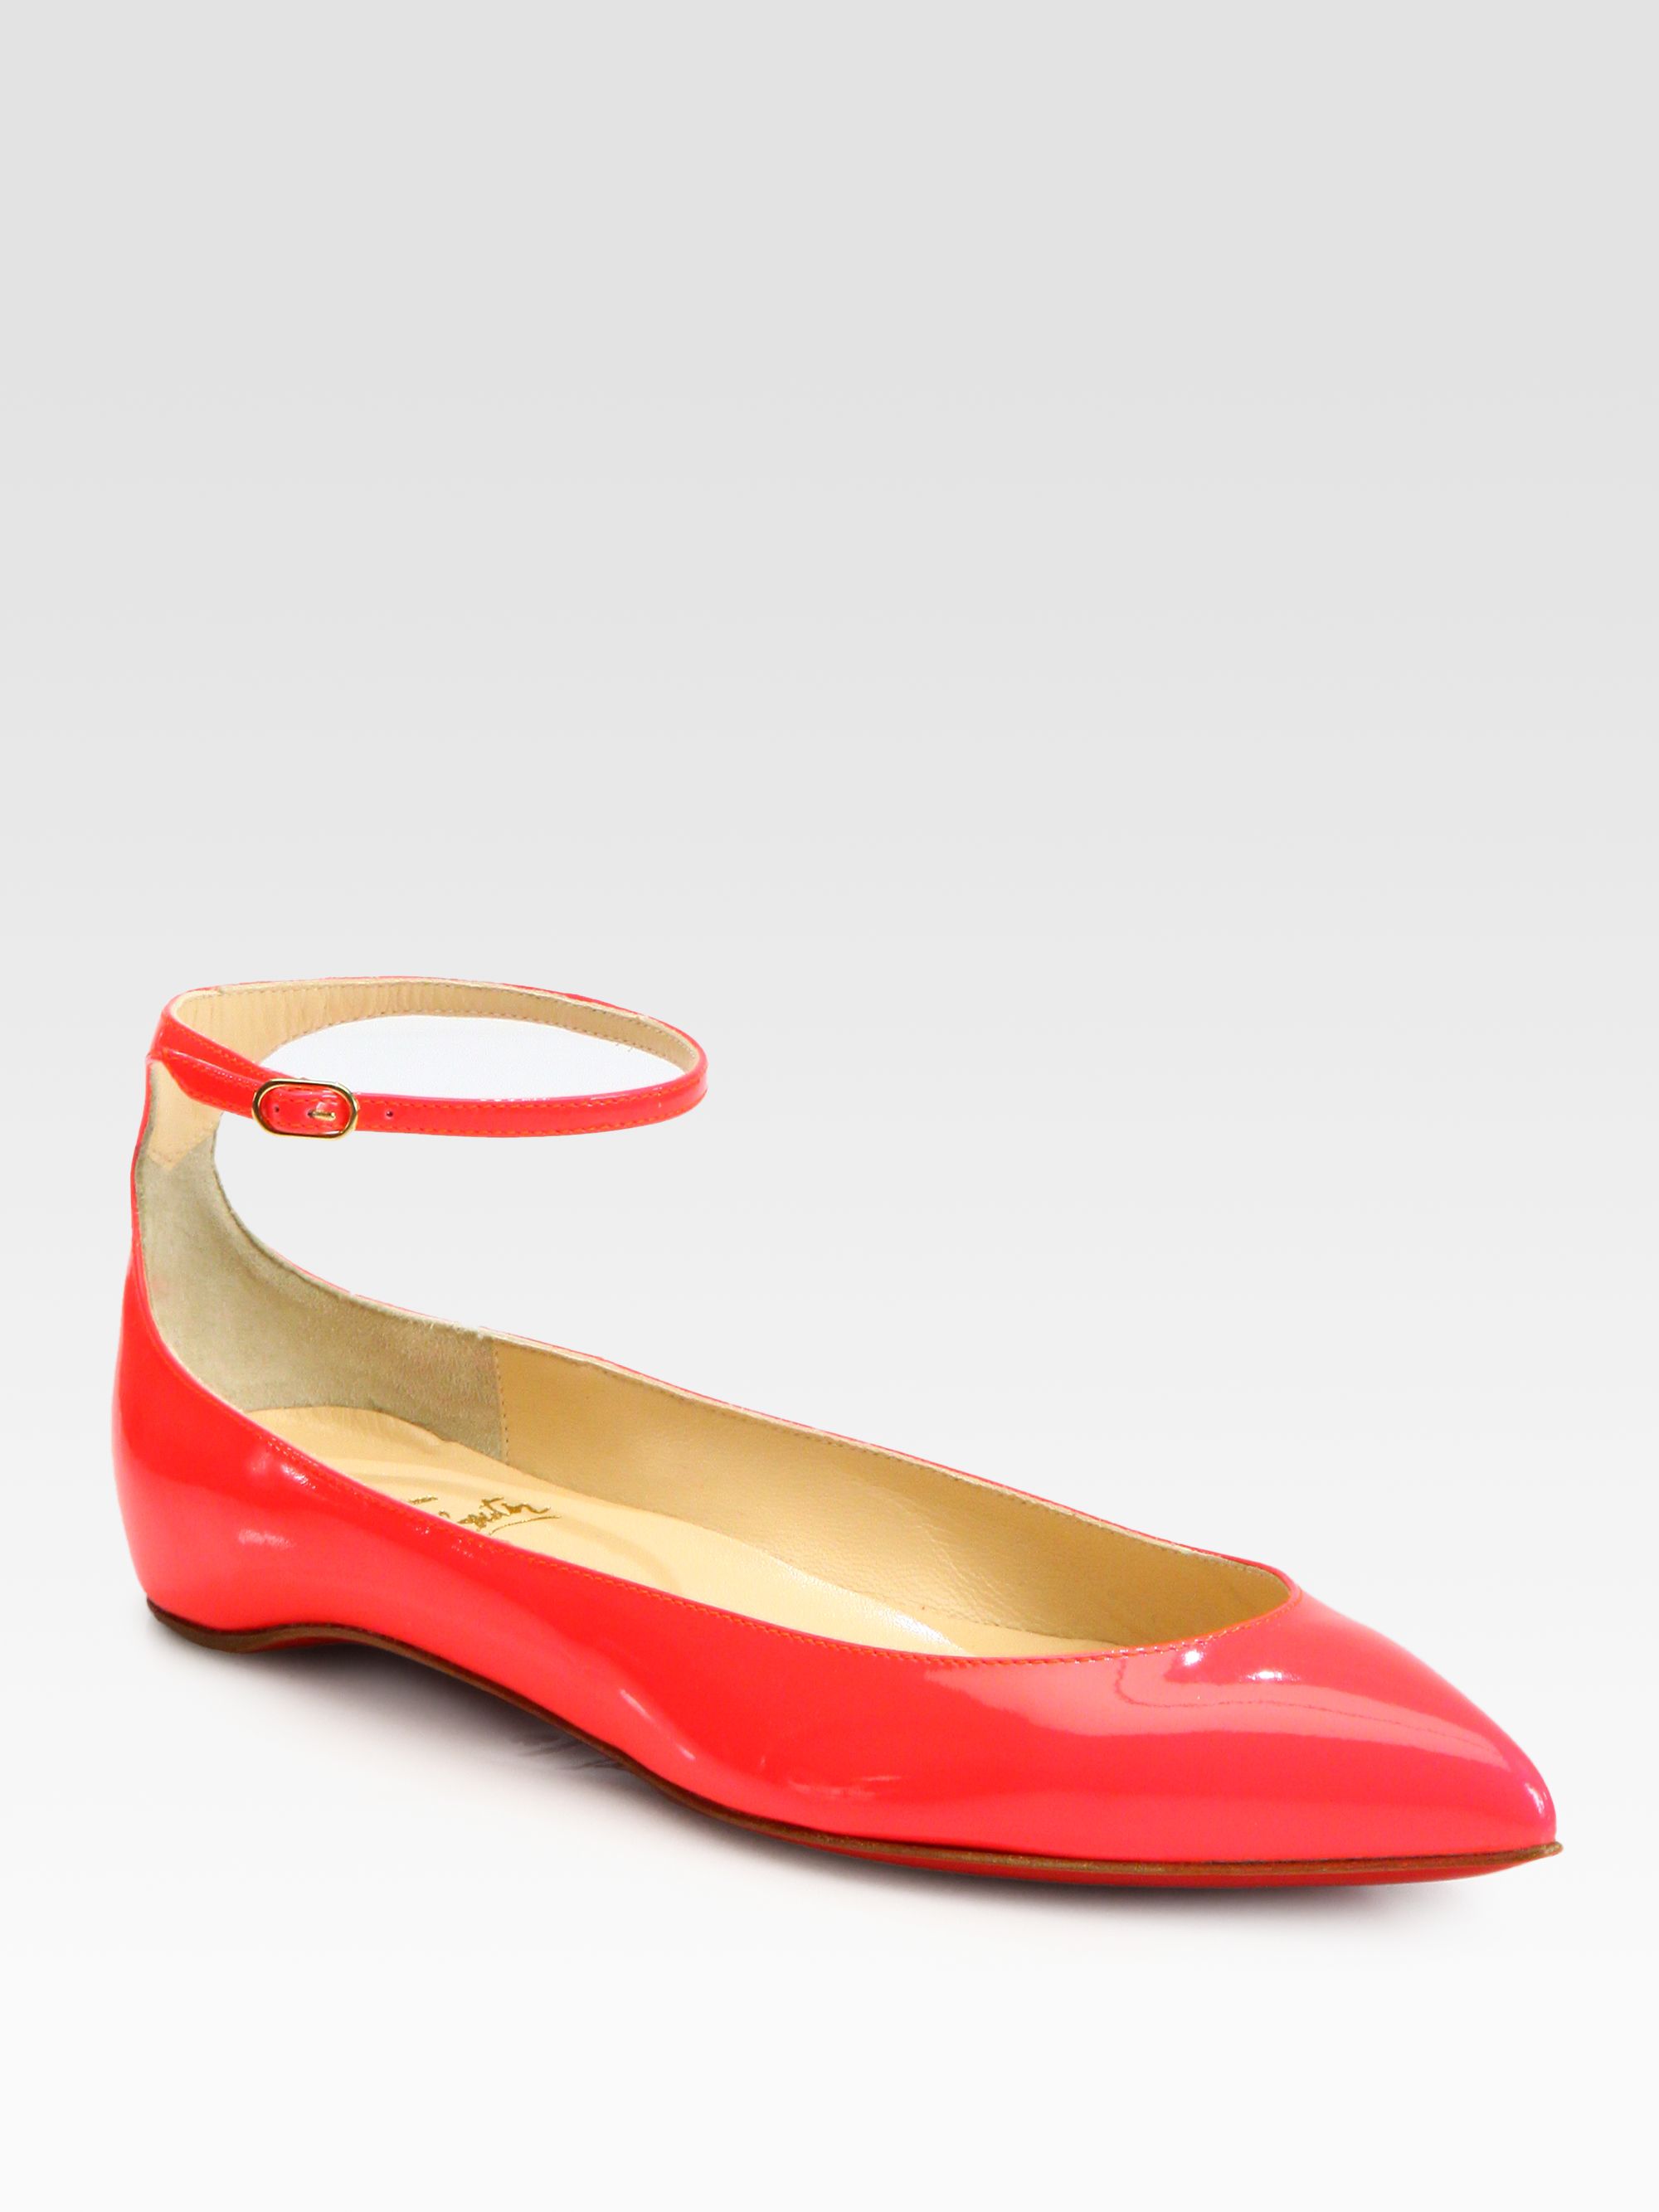 christian louboutin red patent leather ballet flats